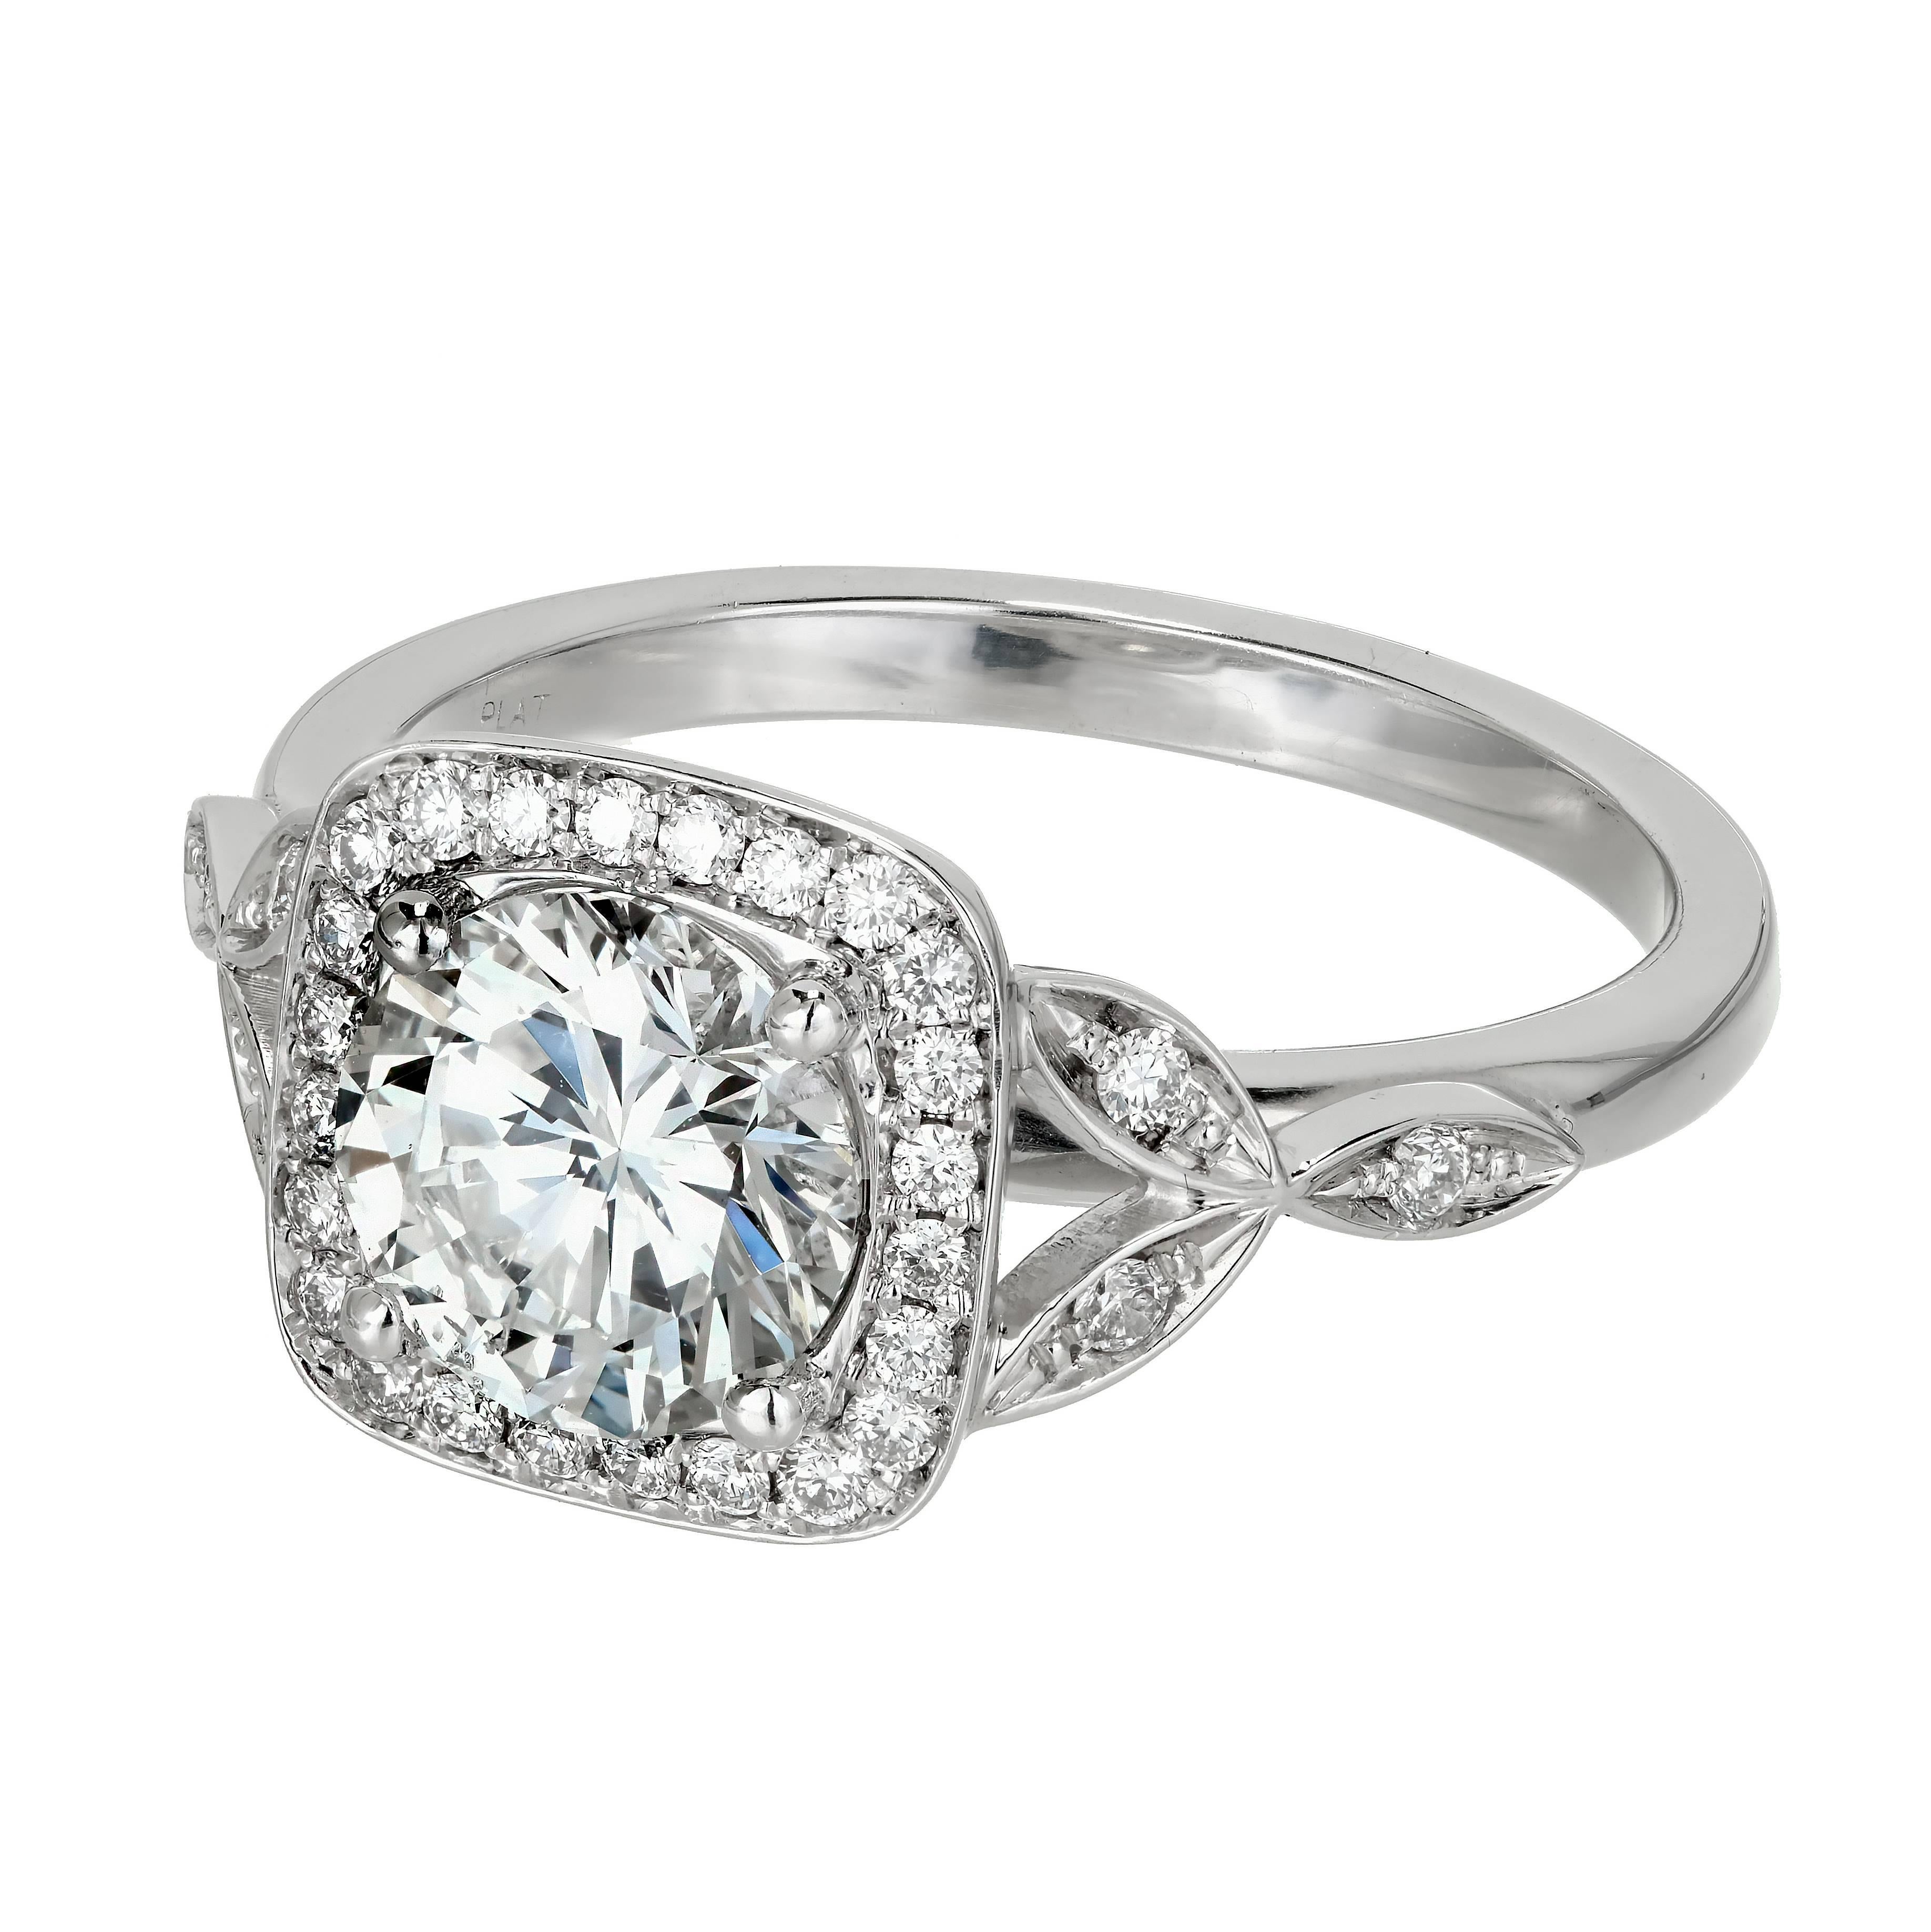 Peter Suchy diamond Platinum engagement ring with a square cushion halo top and flower pedal Diamond sides. The center holds a GIA certified bright white colorless D Diamond with exceptional sparkle and brilliance. The ring is designed so that a